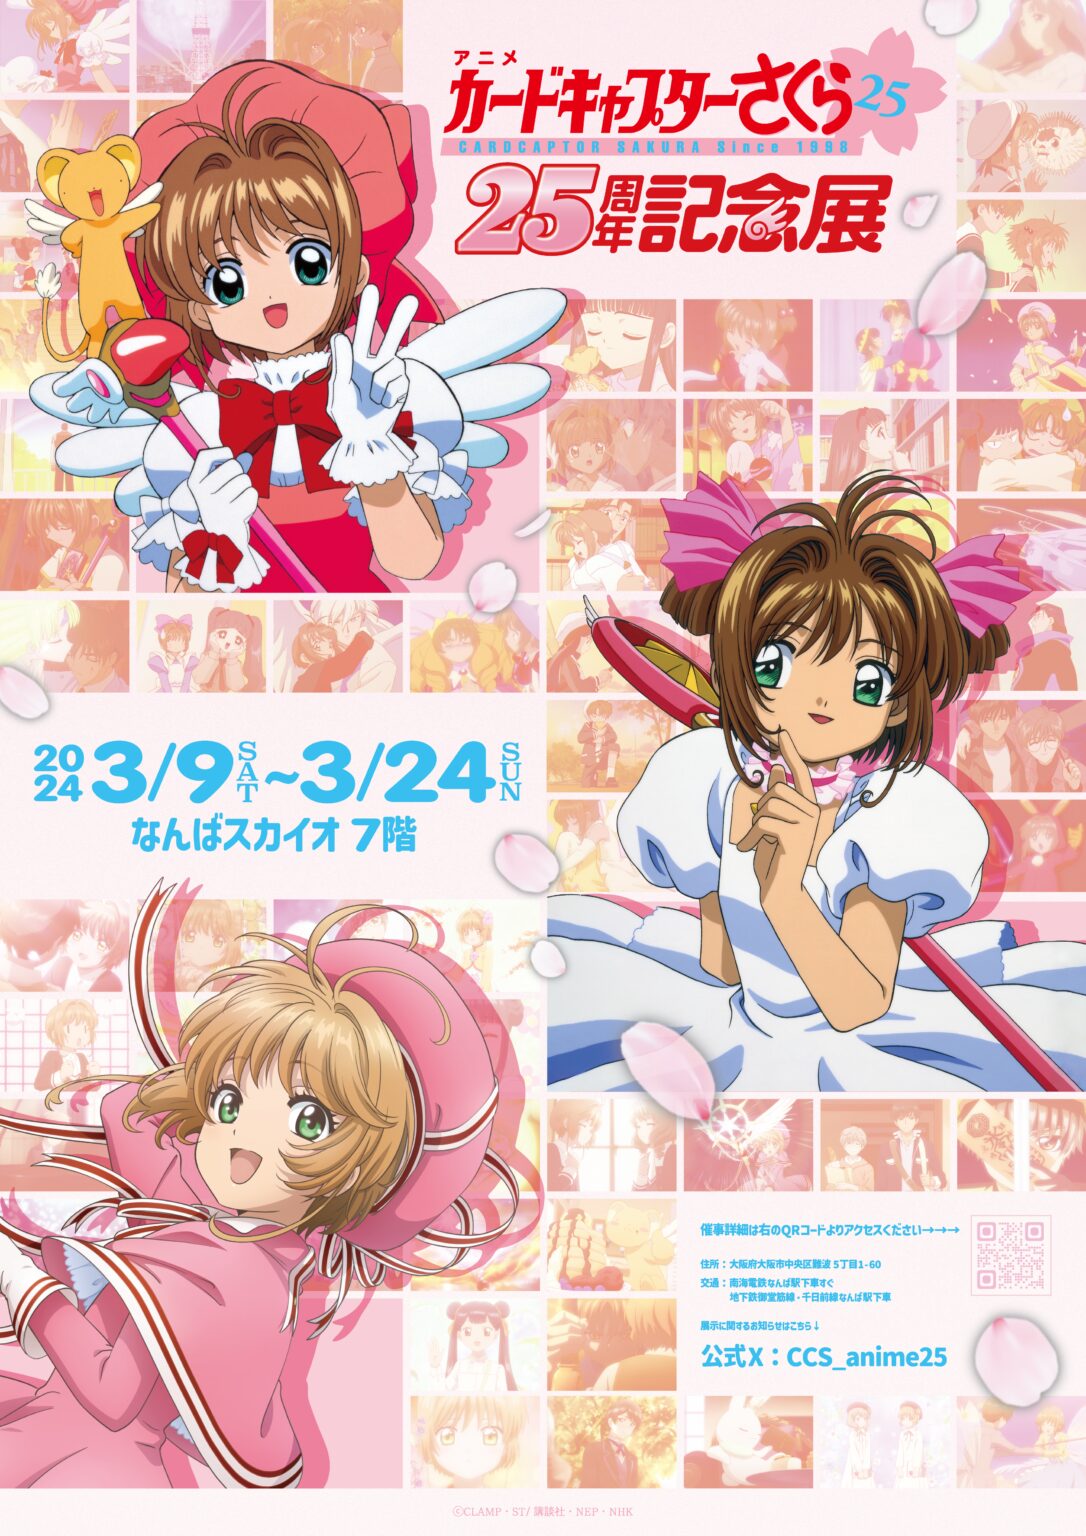 Cardcaptor Sakura – Why Did I Watch This Show? | Too Long for Twitter